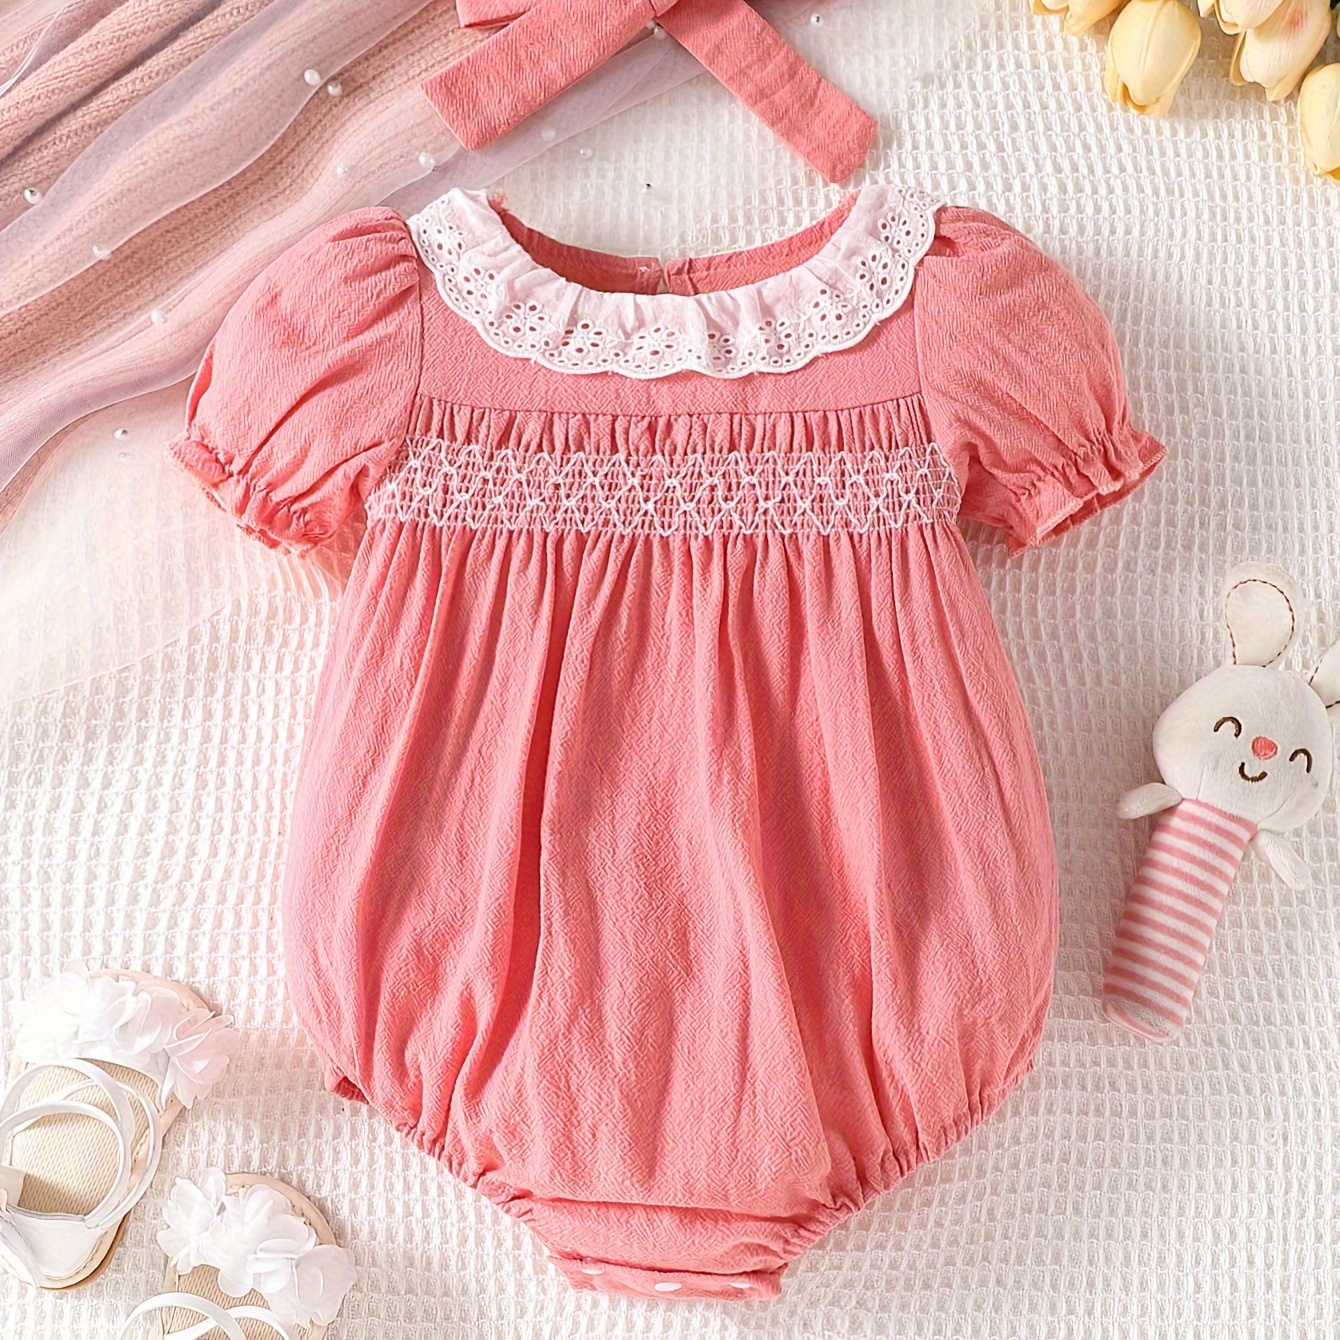 

Baby's Lovely Eyelet Embroidered Ruffle Decor Shirred Triangle Bodysuit, Princess Style Puff Sleeve Romper, Toddler & Infant Girl's Onesie For Summer, As Gift